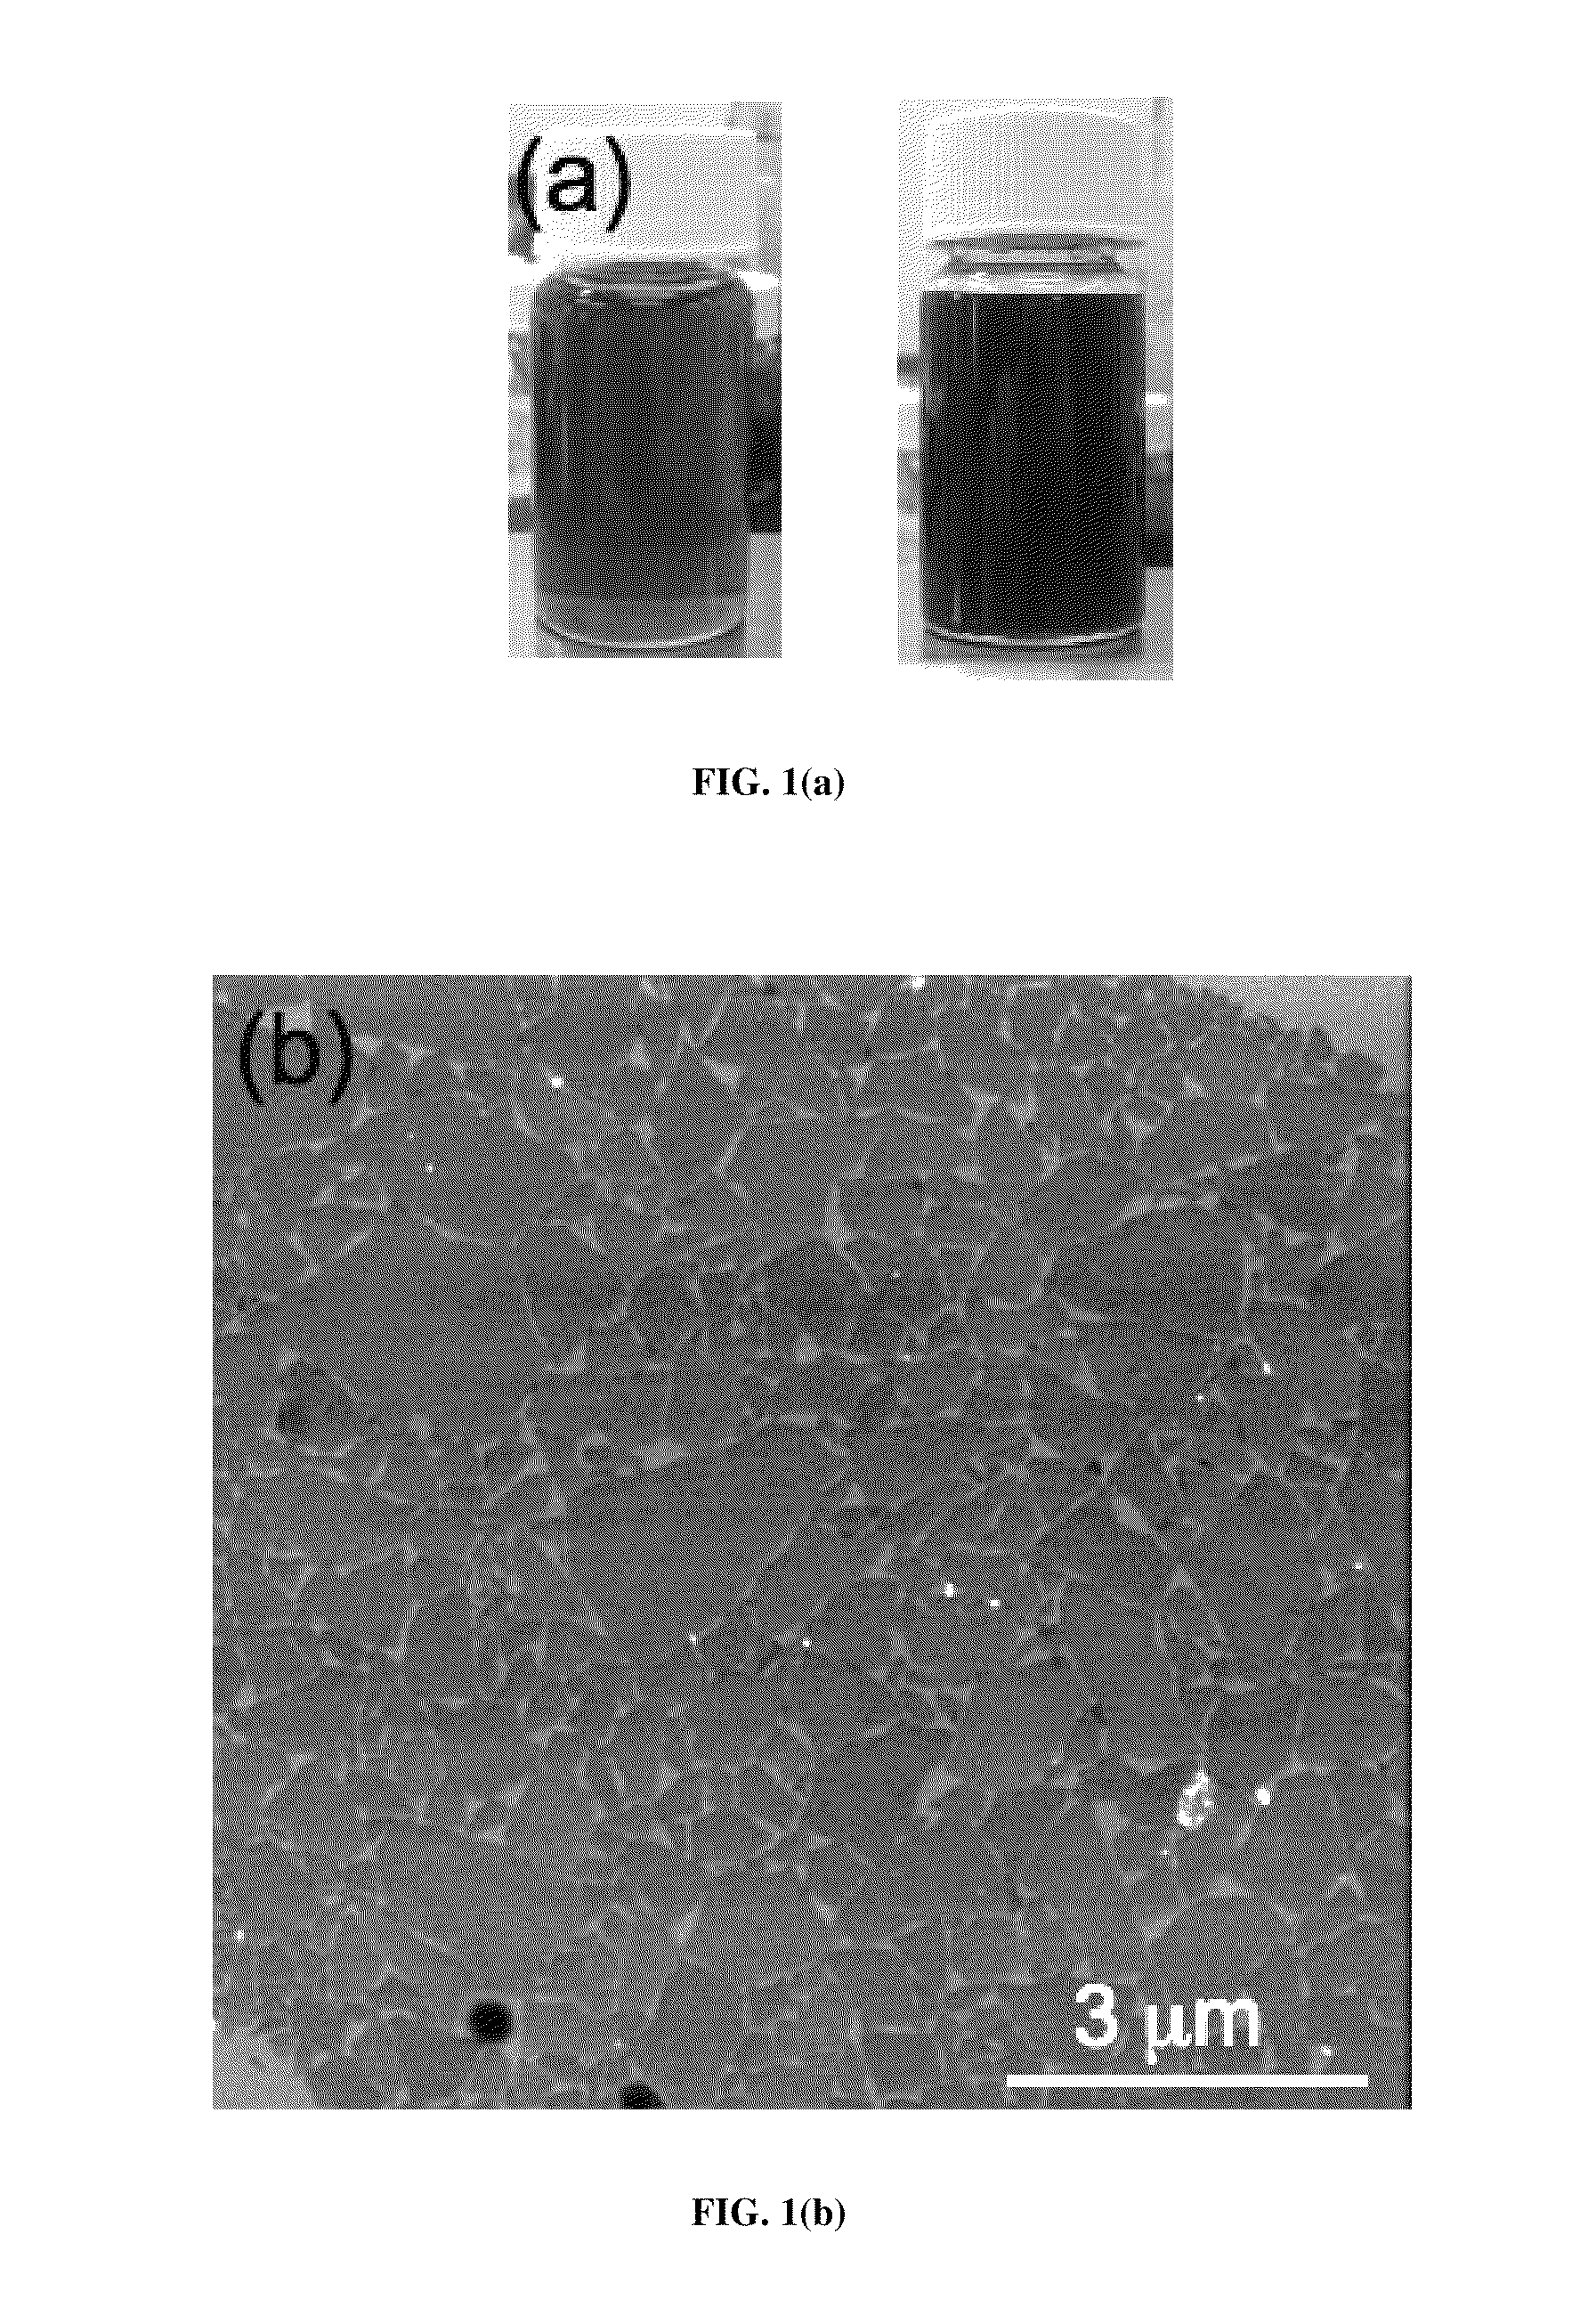 Exfoliation of Graphite Oxide in Propylene Carbonate and Thermal Reduction of Resulting Graphene Oxide Platelets